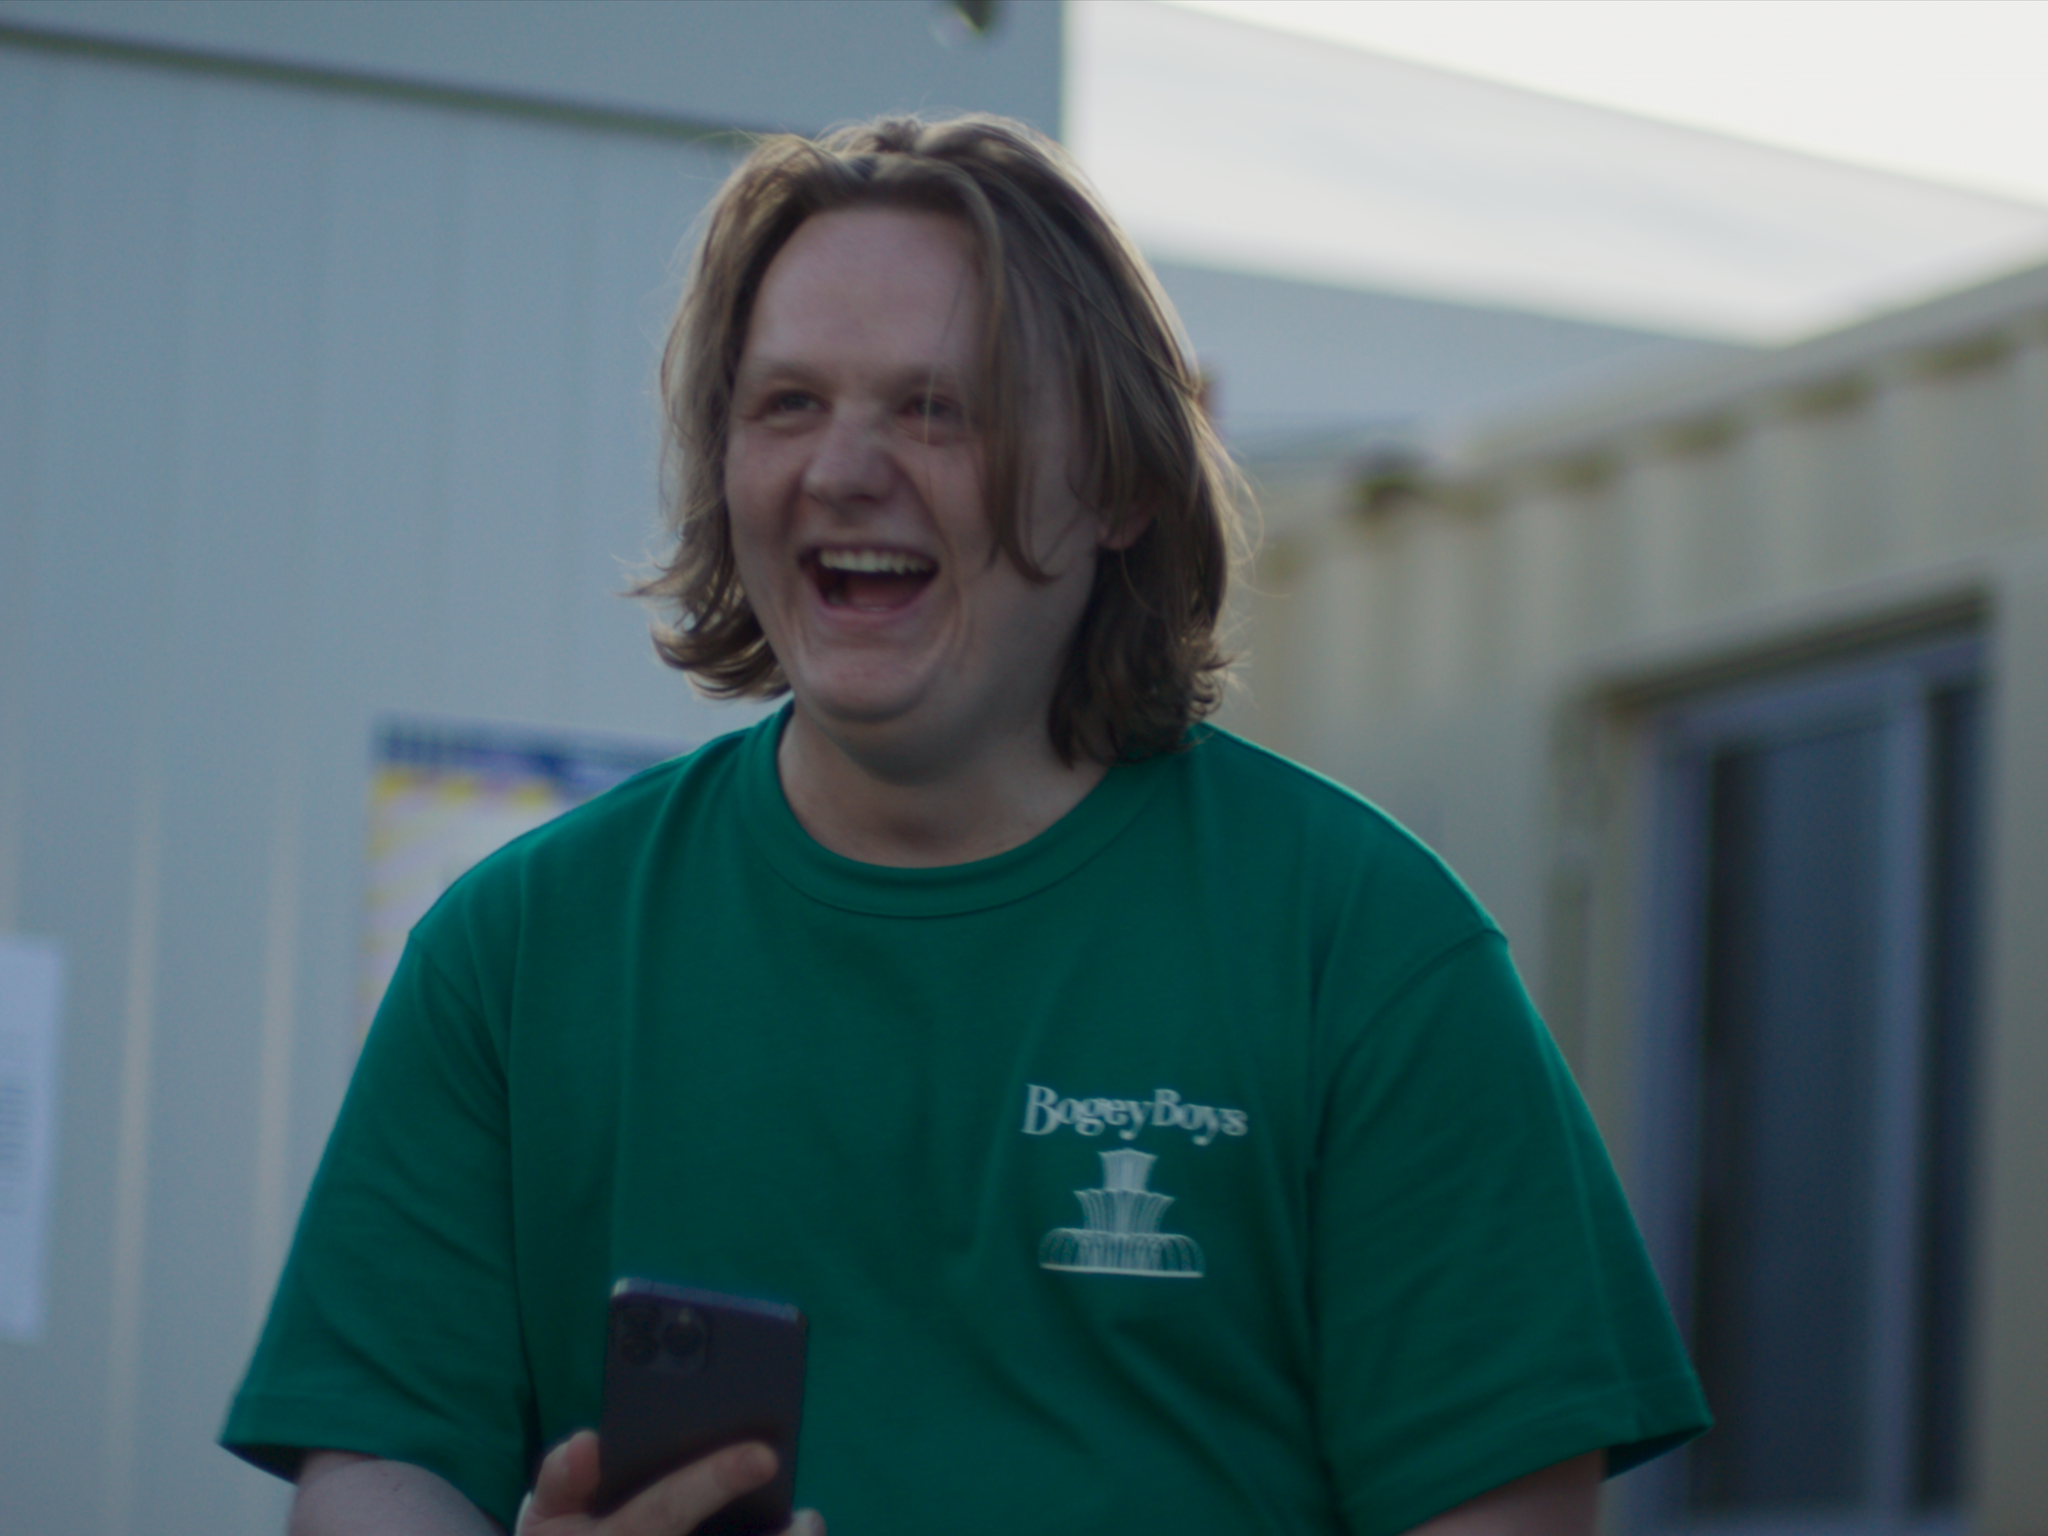 Lewis Capaldi in Netflix’s ‘How I’m Feeling Now’